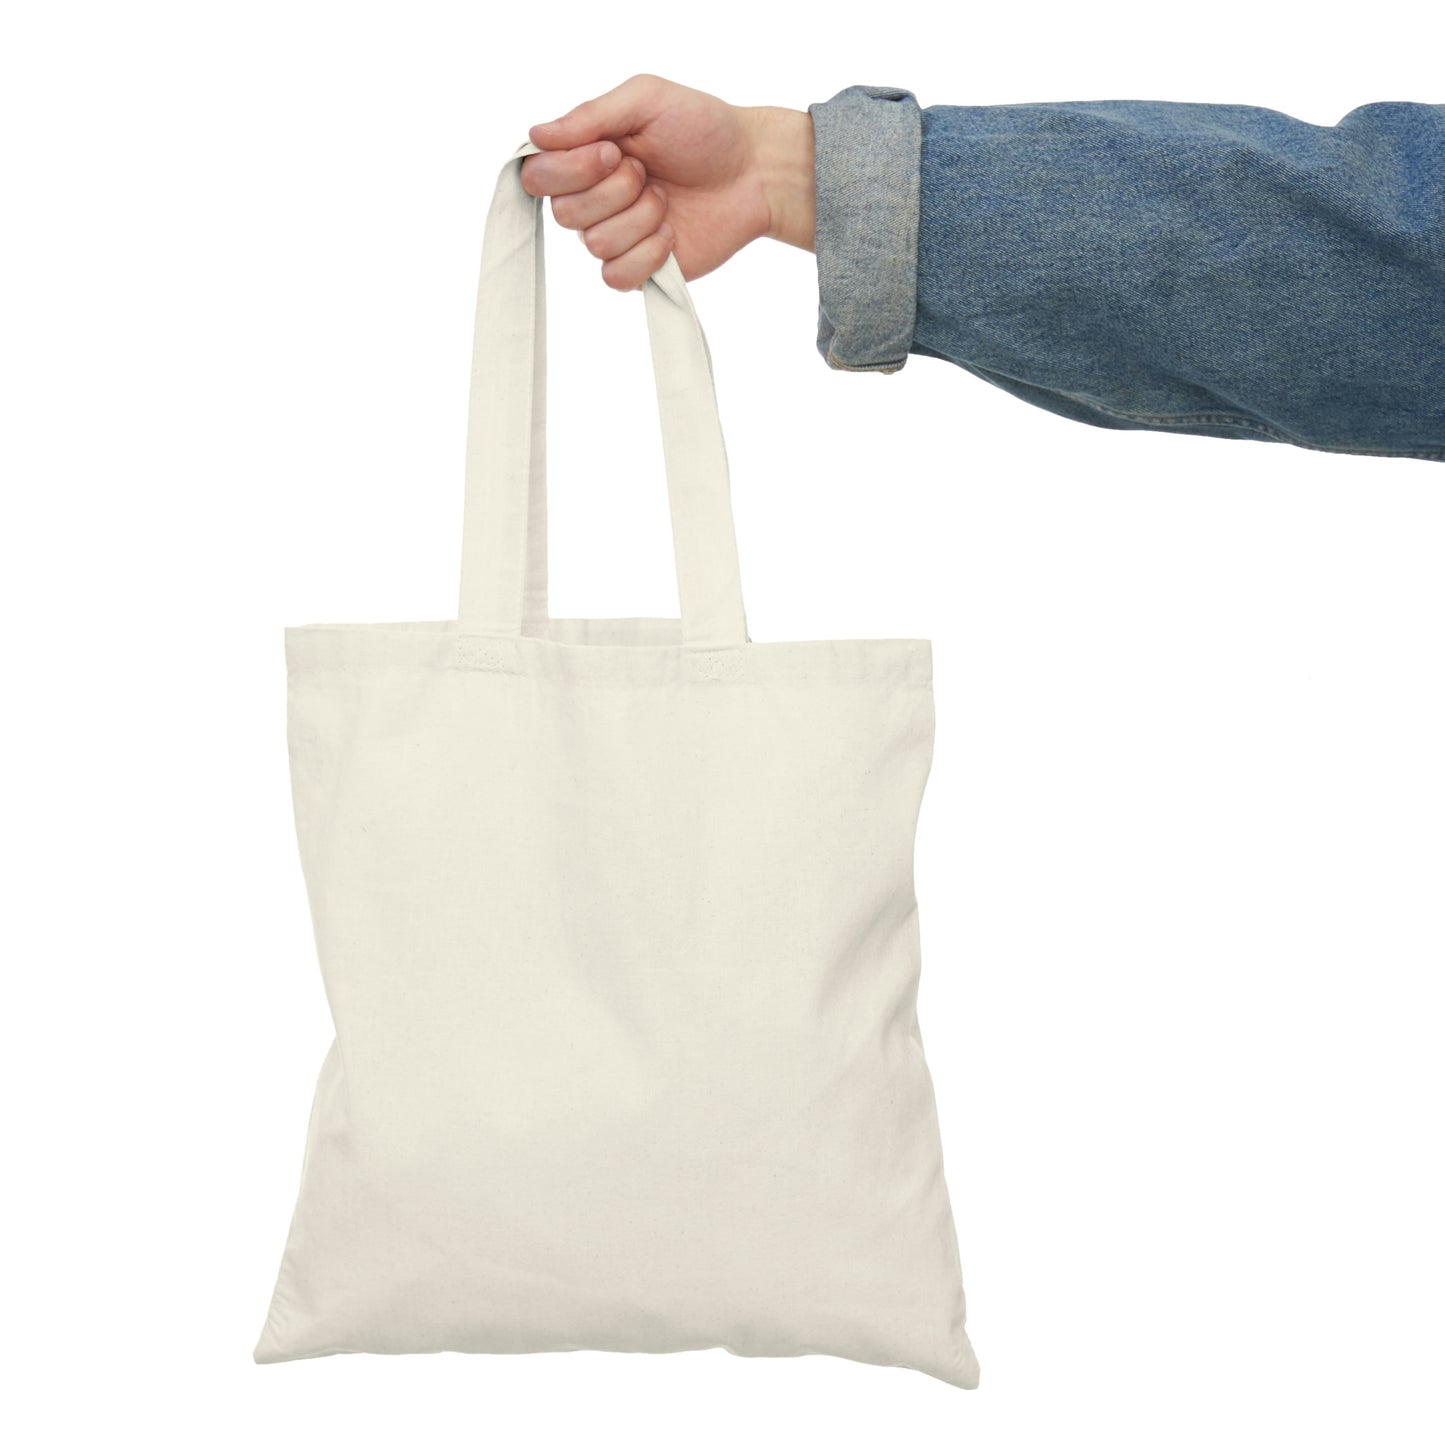 Led By Beasts - Natural Tote Bag